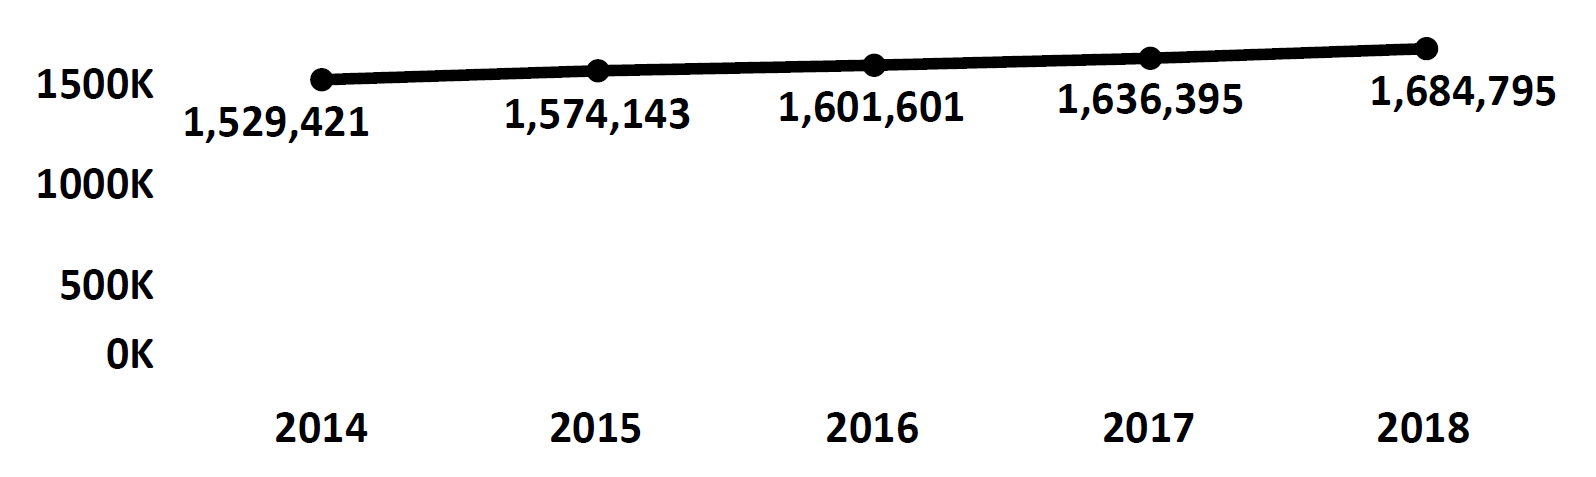 Graph of active Do Not Call registrations in Mississippi each fiscal year from 2014 to 2018. In 2014 there were 1.5 million numbers registered, which increased each year. In 2018 there were 1.6 million numbers registered.